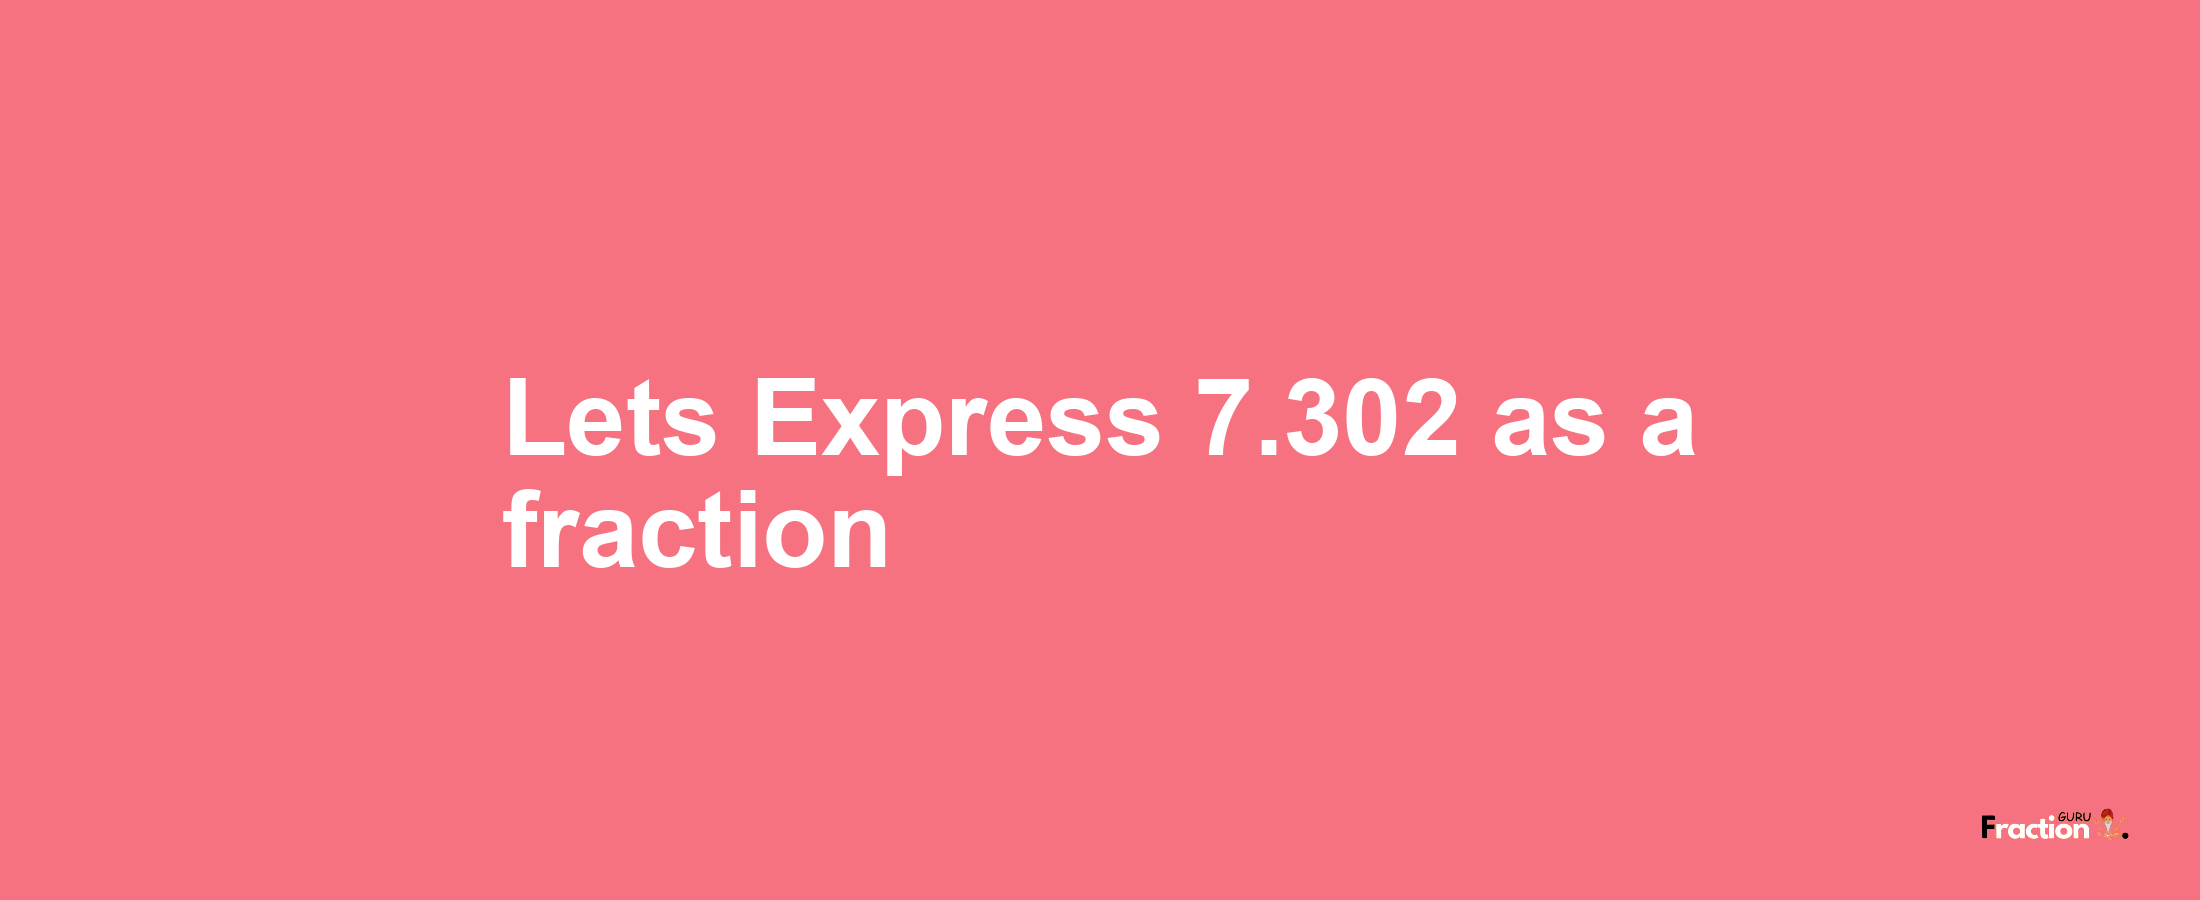 Lets Express 7.302 as afraction